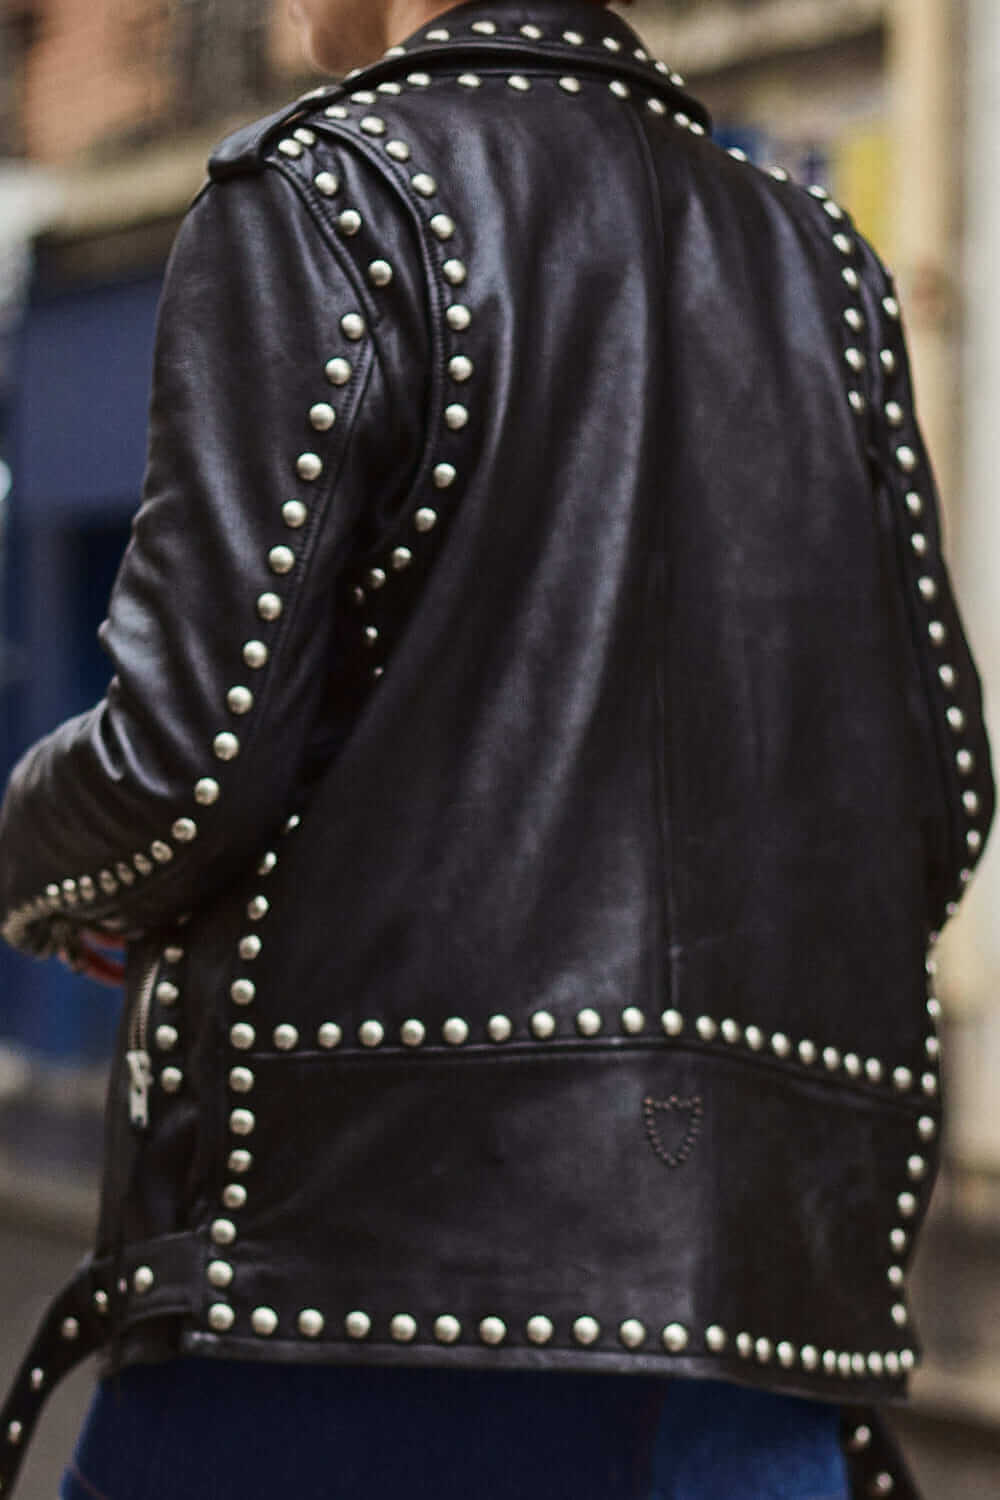 BONNIE JACKET Black leather studded jacket. Central zip closure. Side and frontal pockets with zip closure. 100% leather. Made in Italy. HTC LOS ANGELES